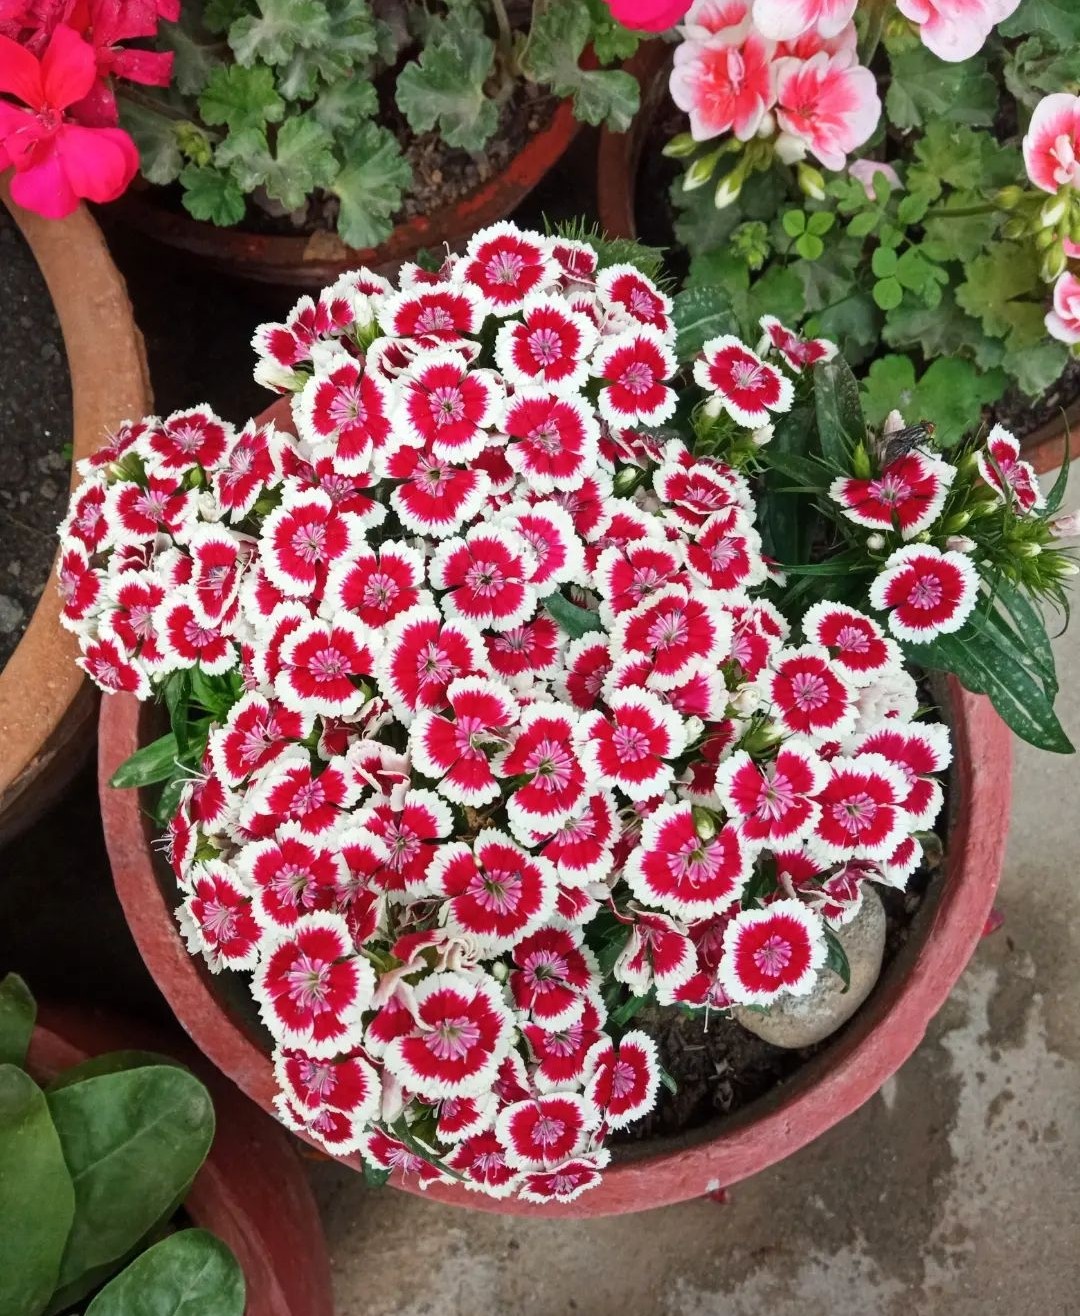 Red and white dianthus flowers